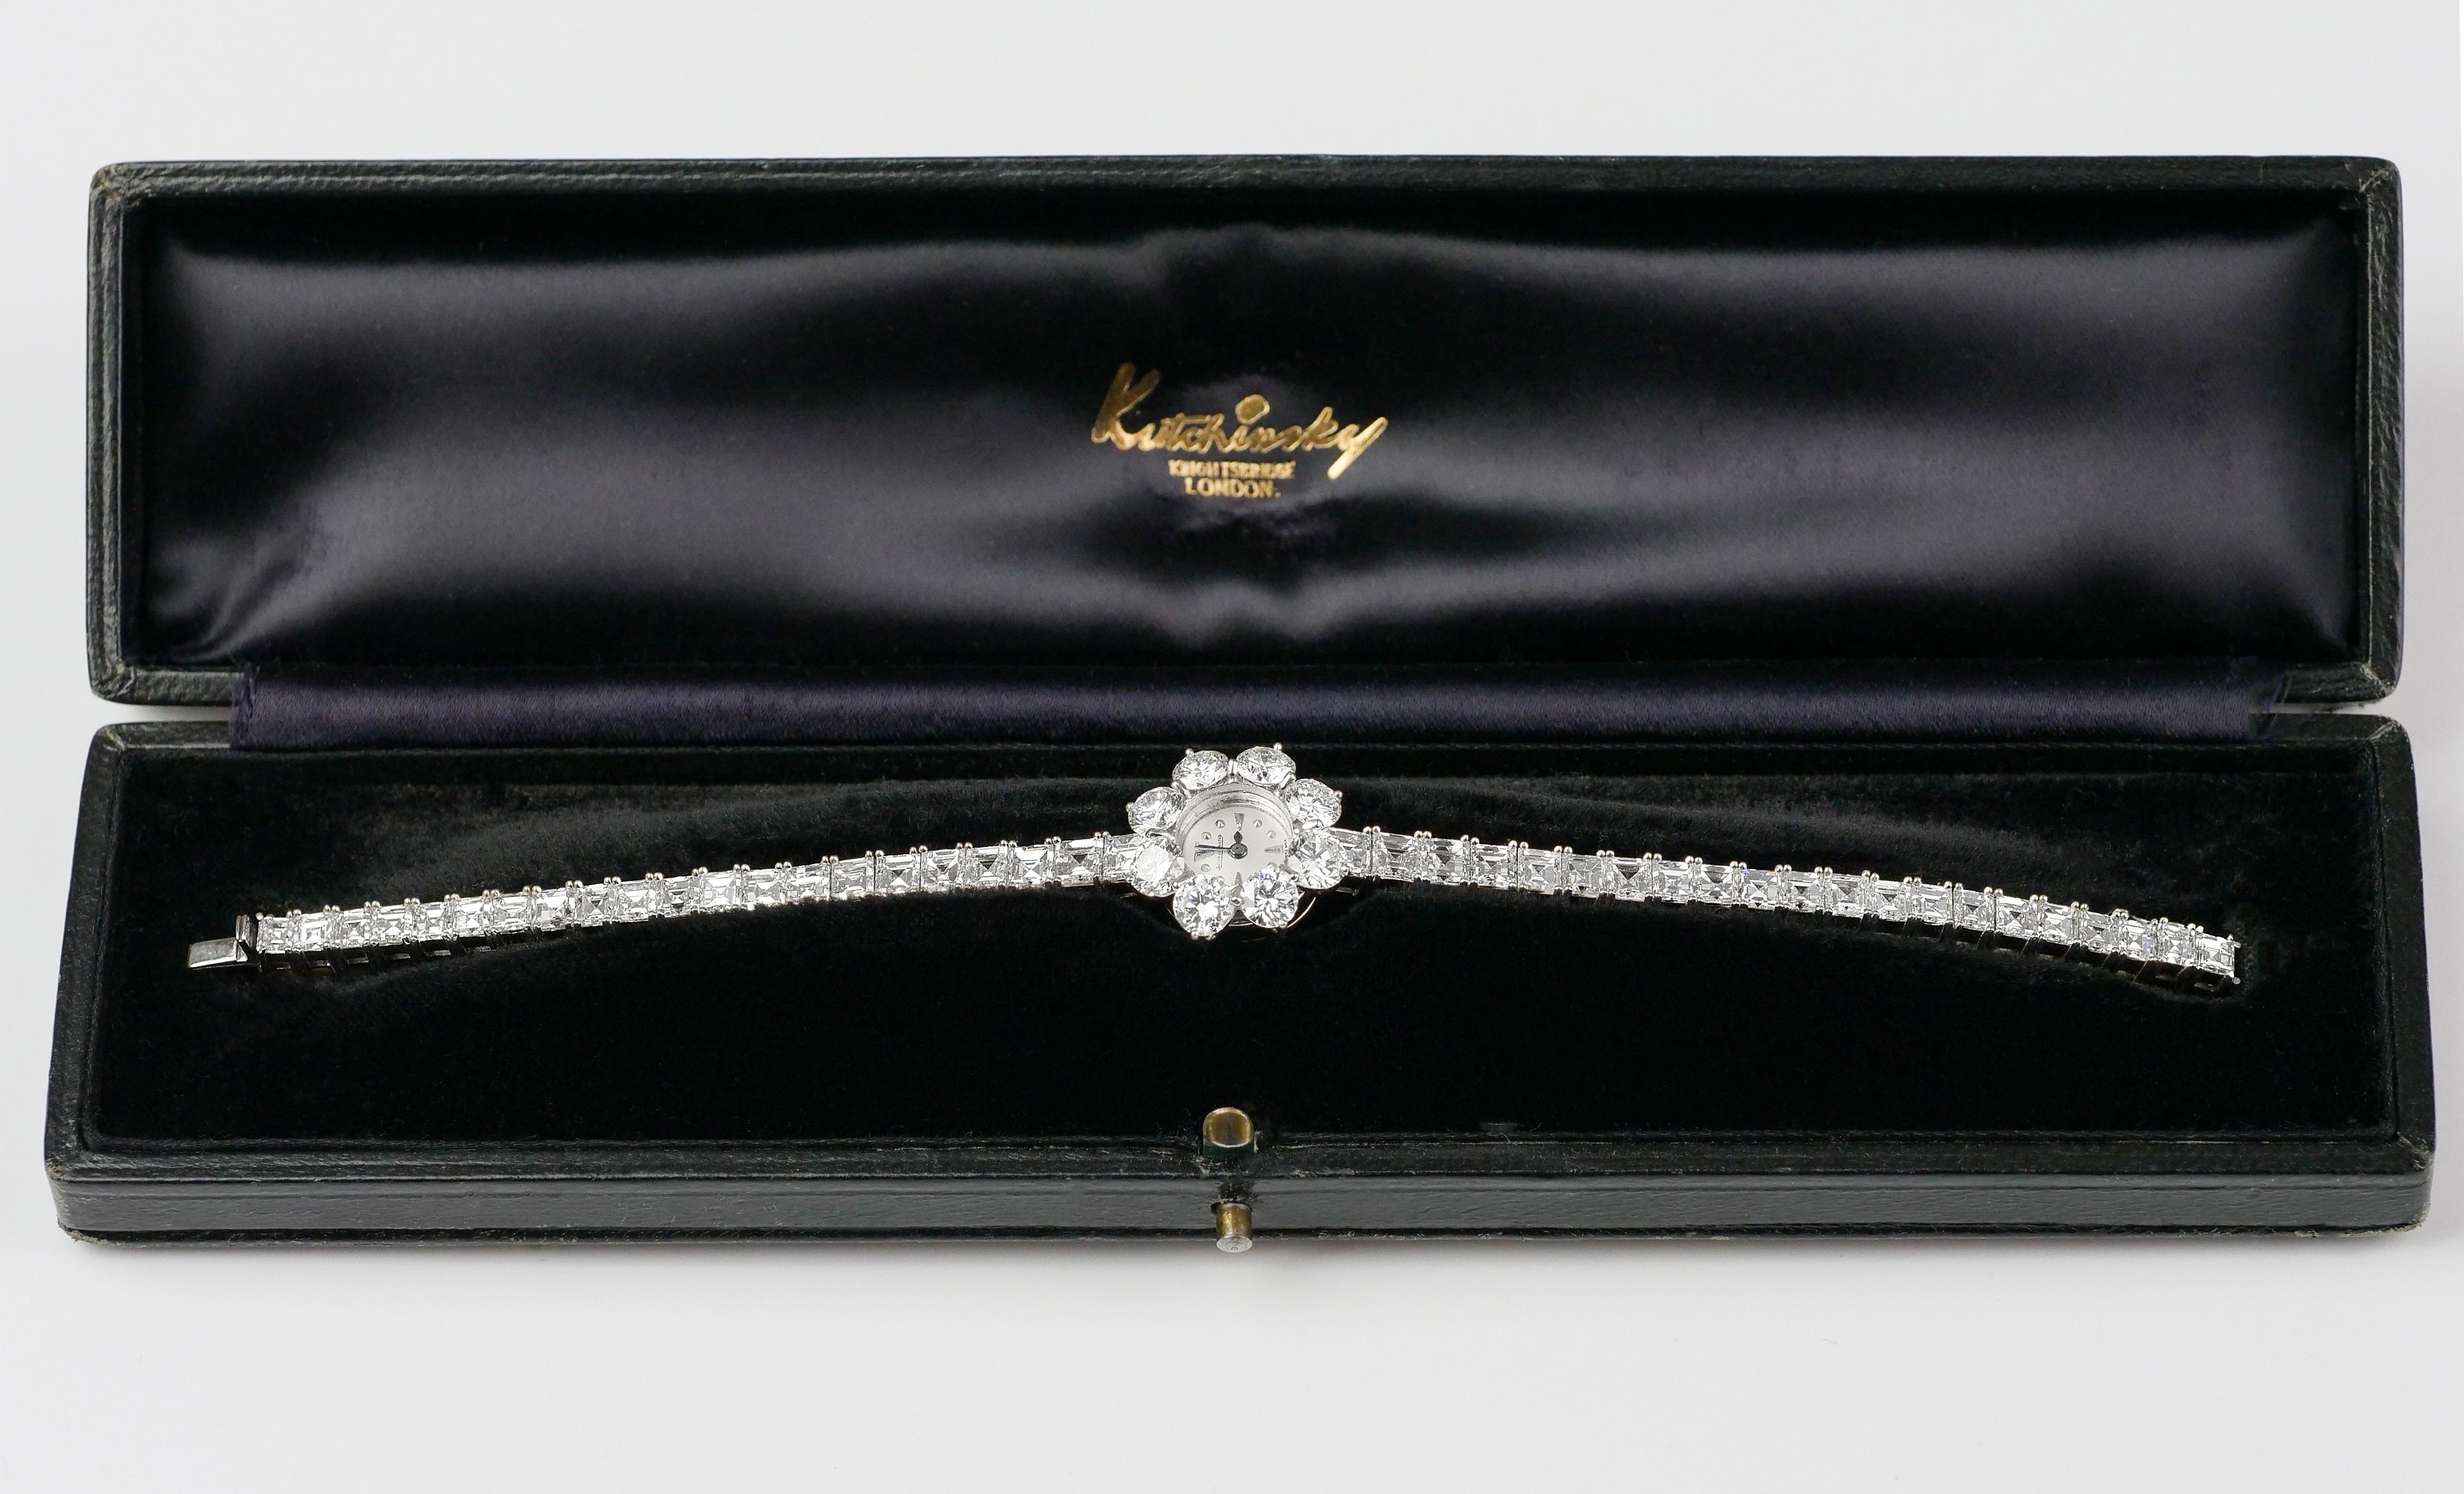 This is a stunning piece of 1960s jewellery, a divine diamond bracelet watch created by  Kutchinsky London with a Jaeger-Le-Coultre movement. This elegant watch itself is a magnificent diamond flower head with eight petals, consists of round